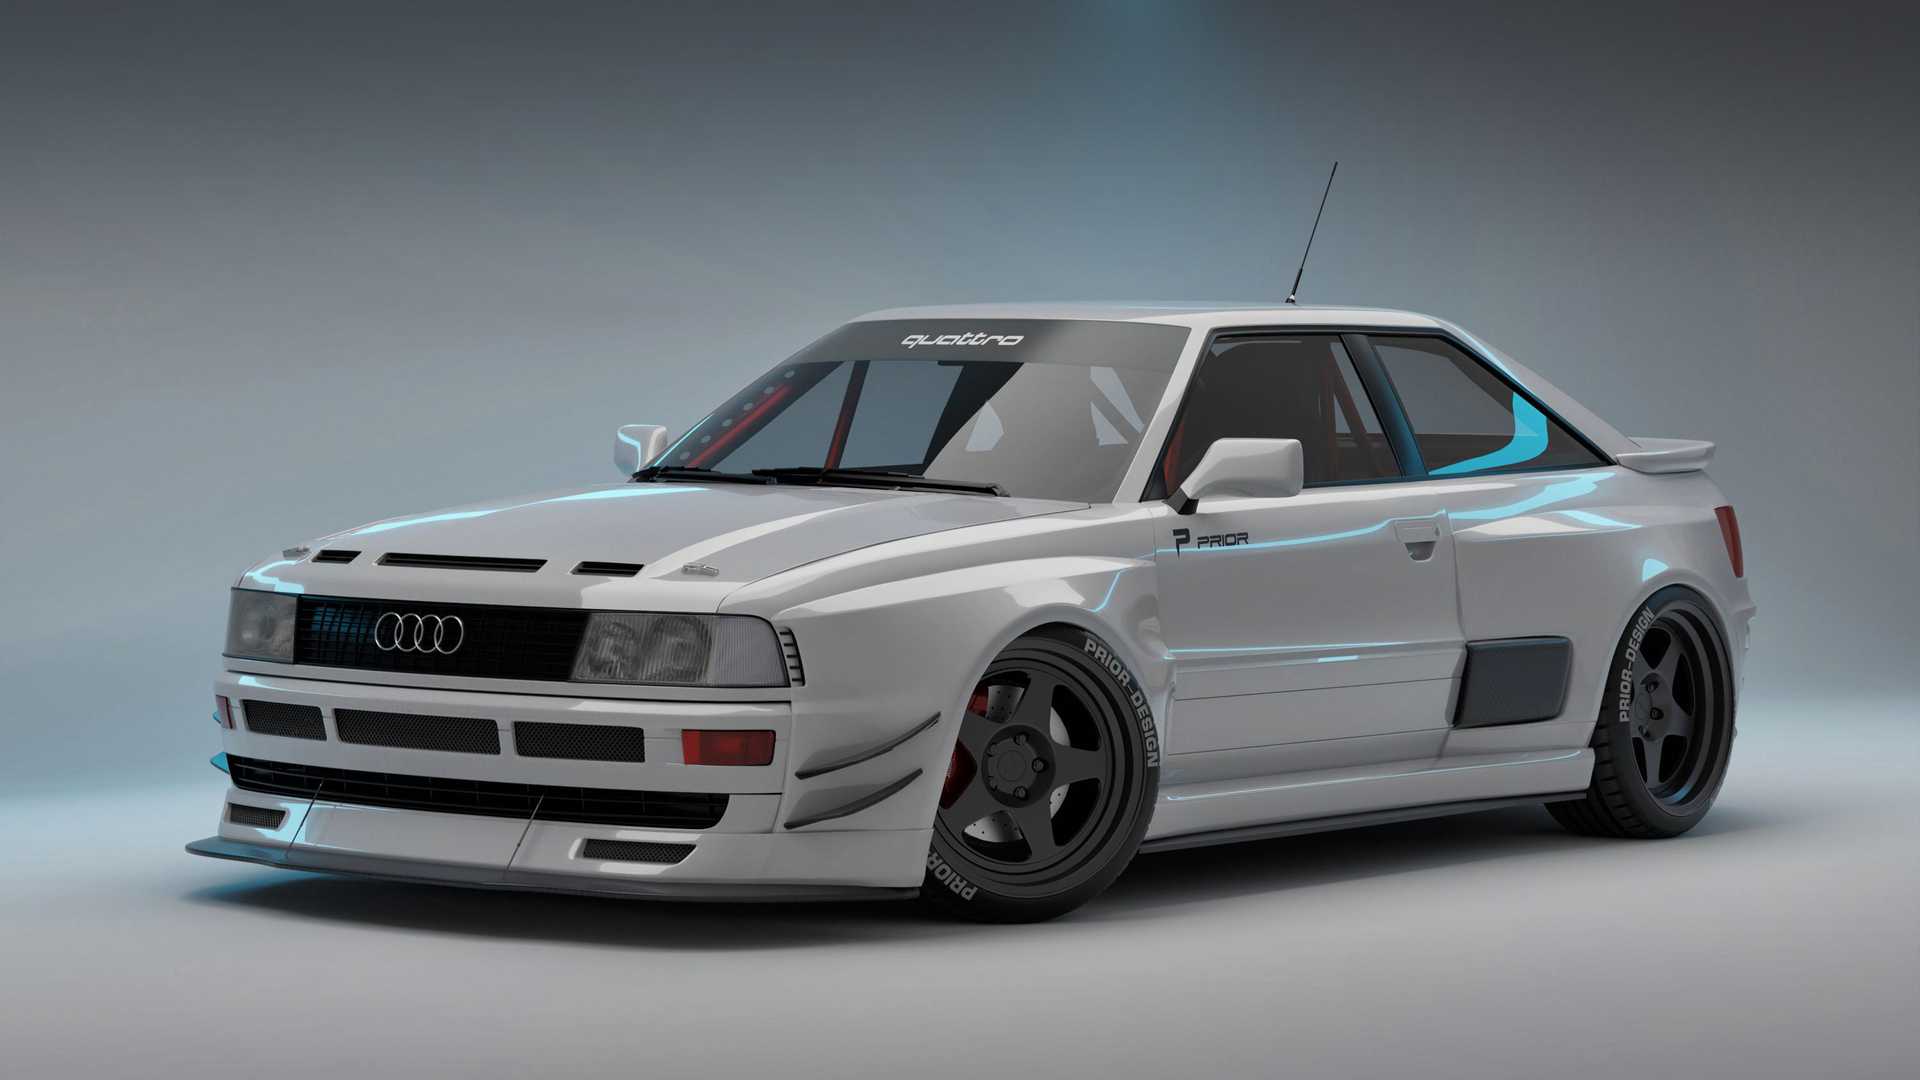 Prior Design Building What Audi Did Not, An RS2 Coupe